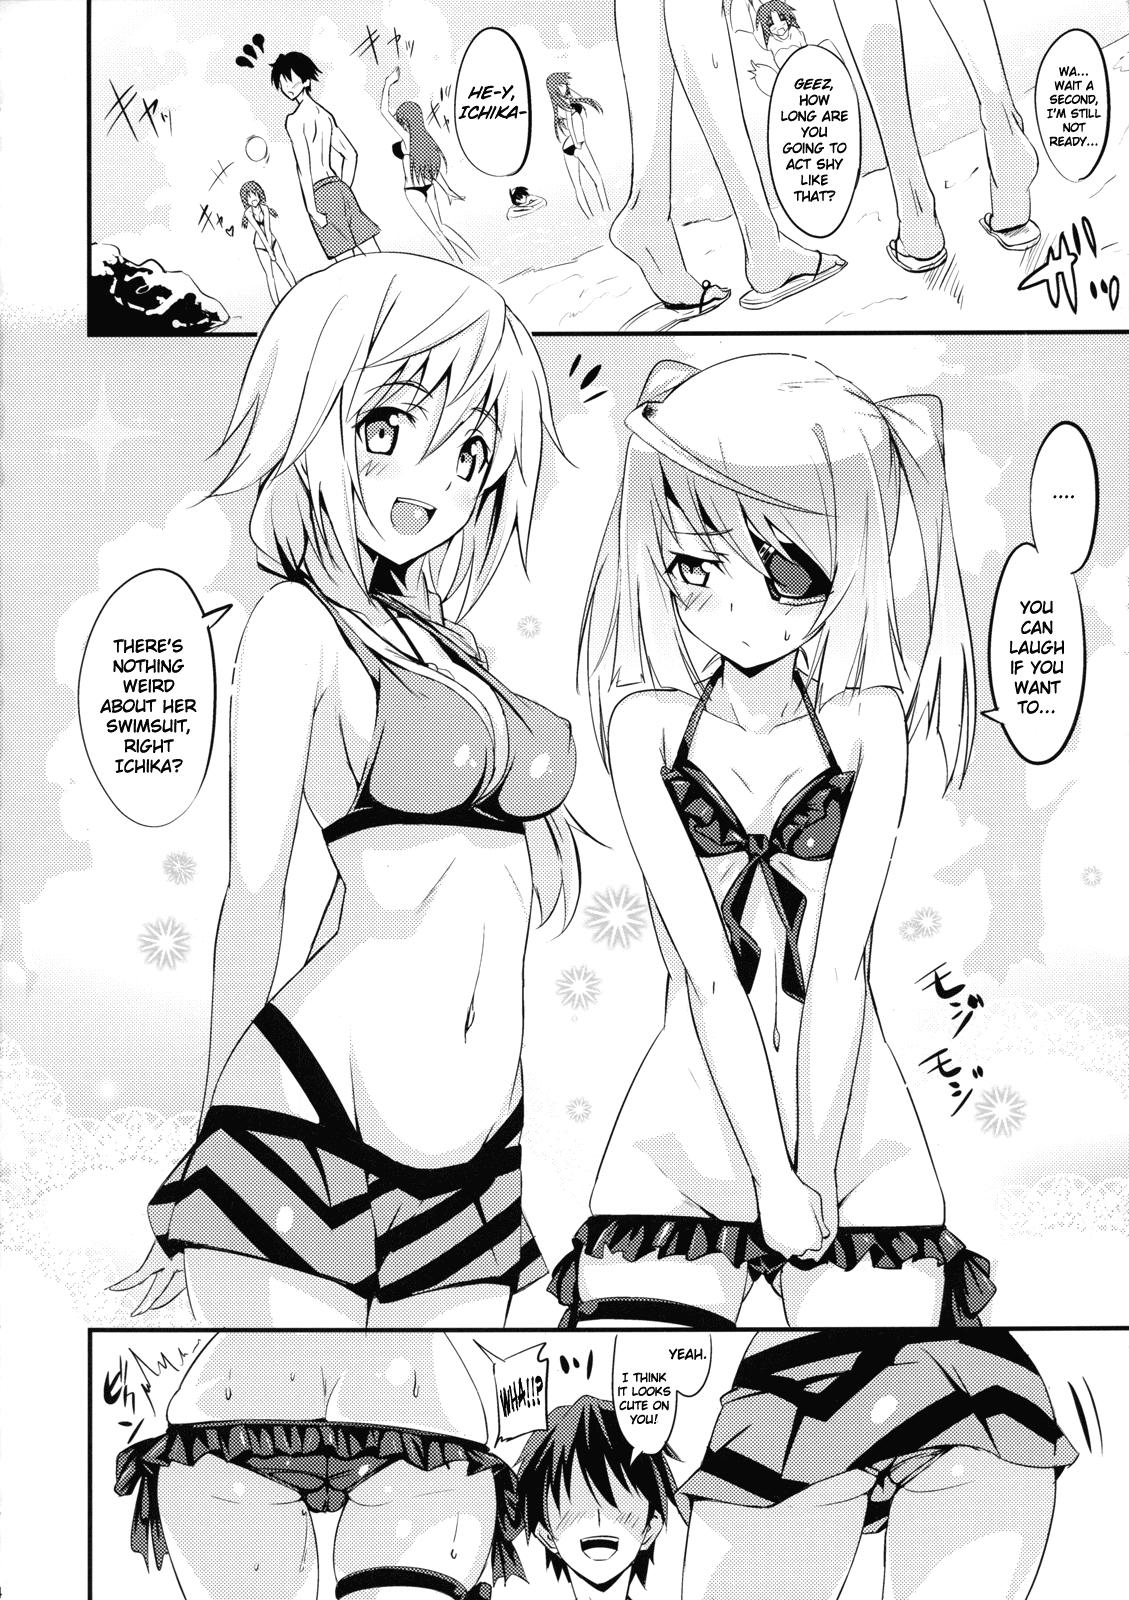 Hot Cunt SODA! - Infinite stratos Amateur - Page 3